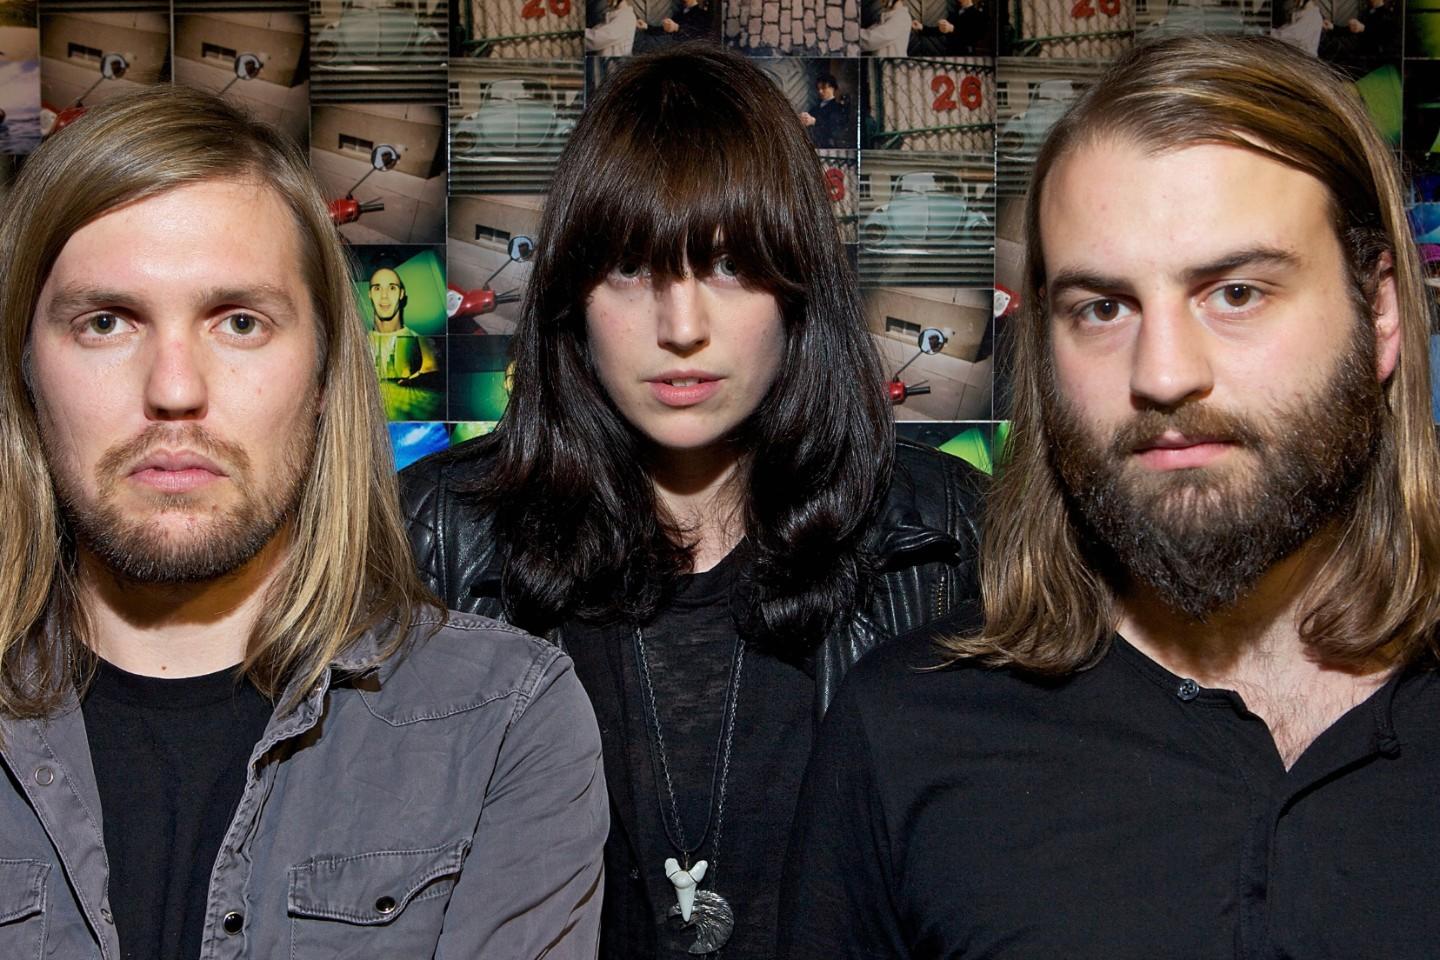 Band of Skulls Tickets | Band of Skulls Tour and Concert Tickets - viagogo